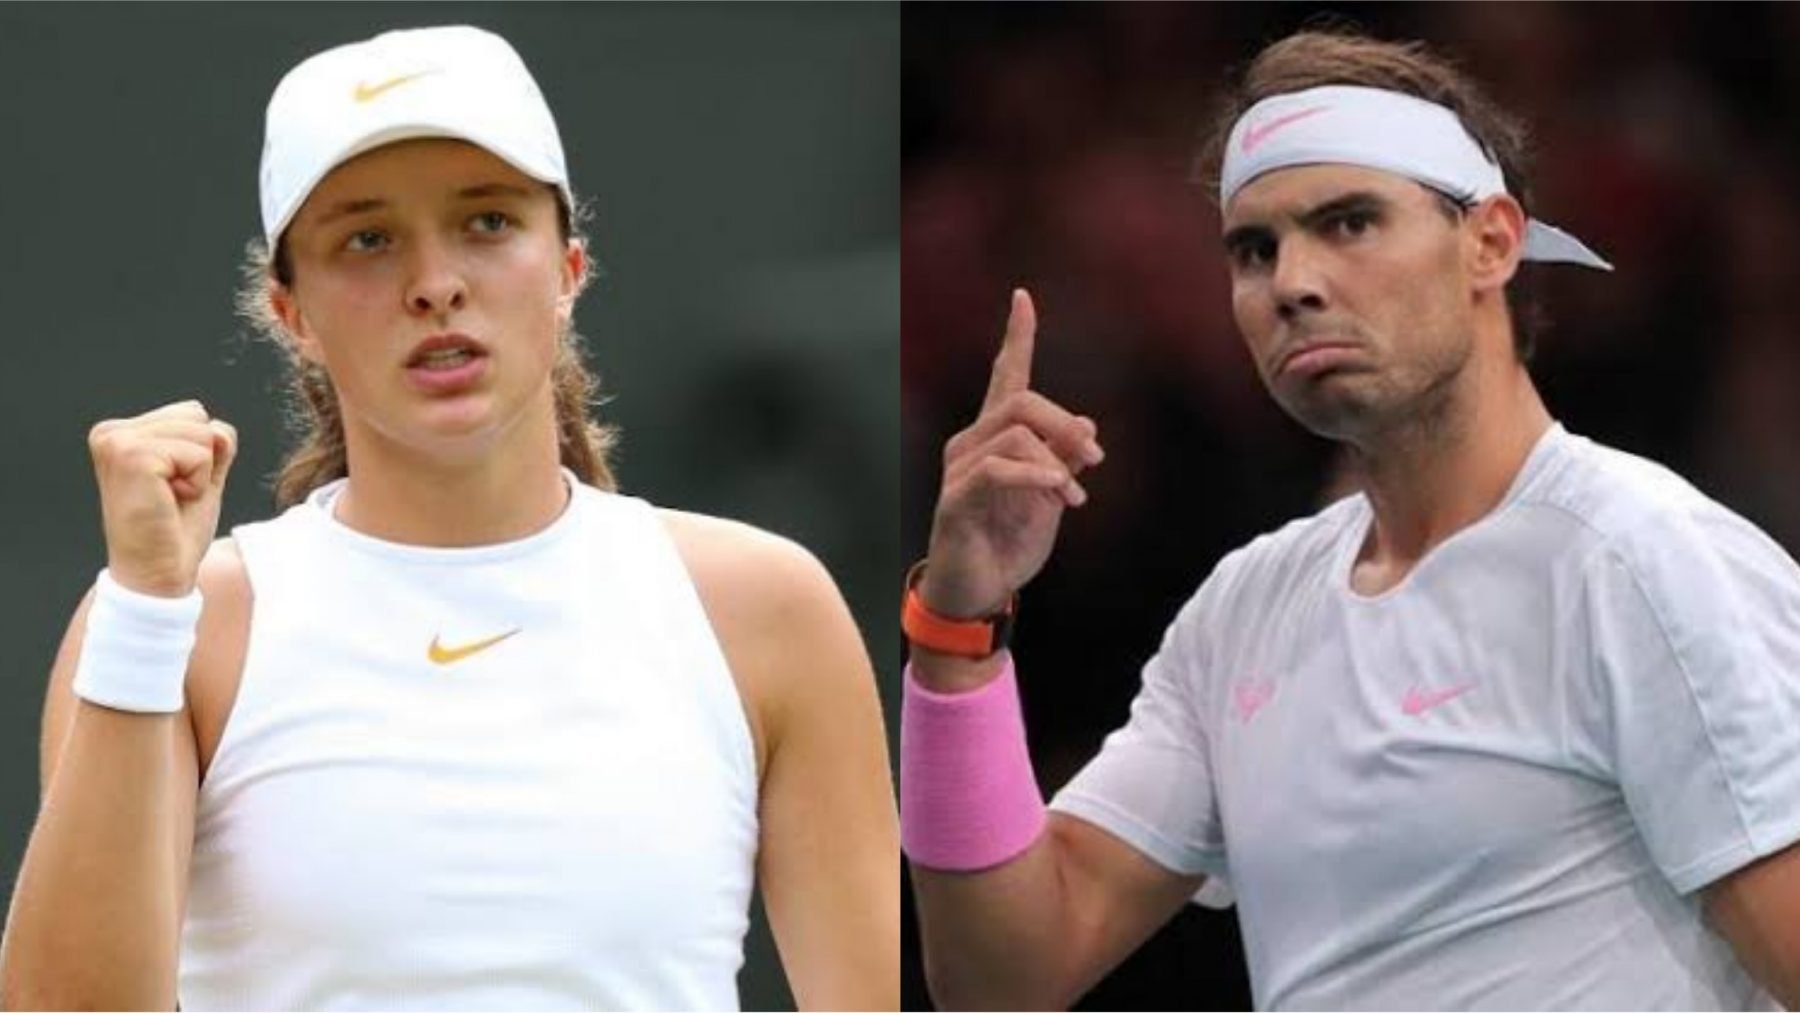 French open 2022 LIVE Rafael Nadal SUPER-IMPRESSED with Iga Swiatek, calls her something very special